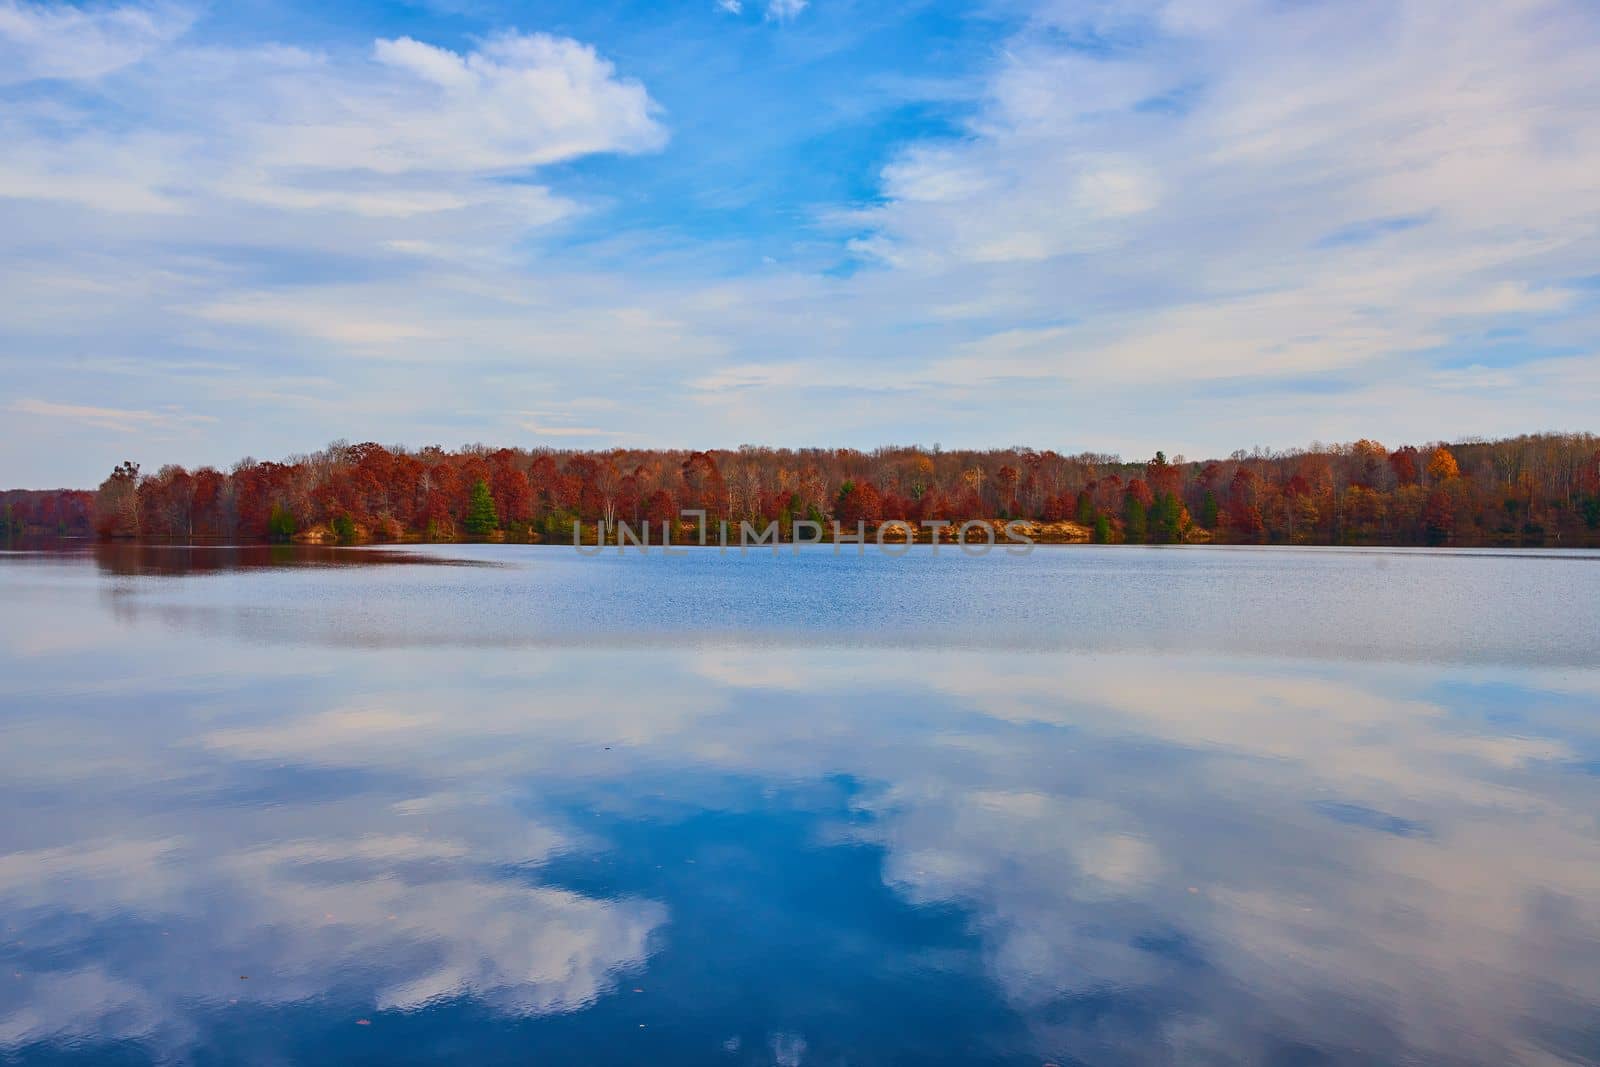 Image of Crystal clear lake surface with fall forests lining the coast in Michigan